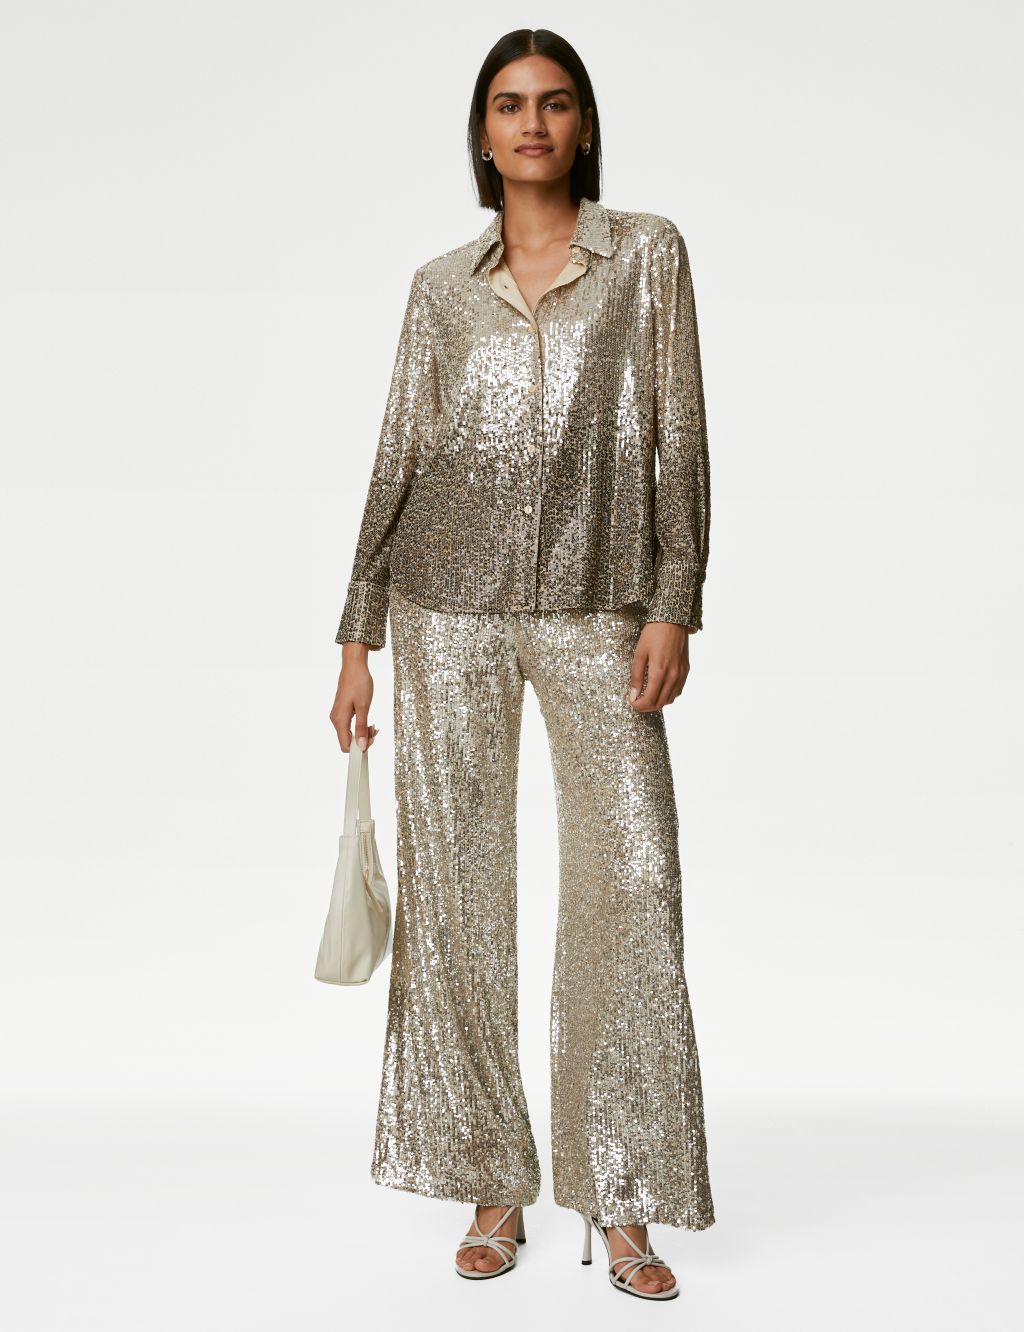 Sequin Collared Shirt image 7